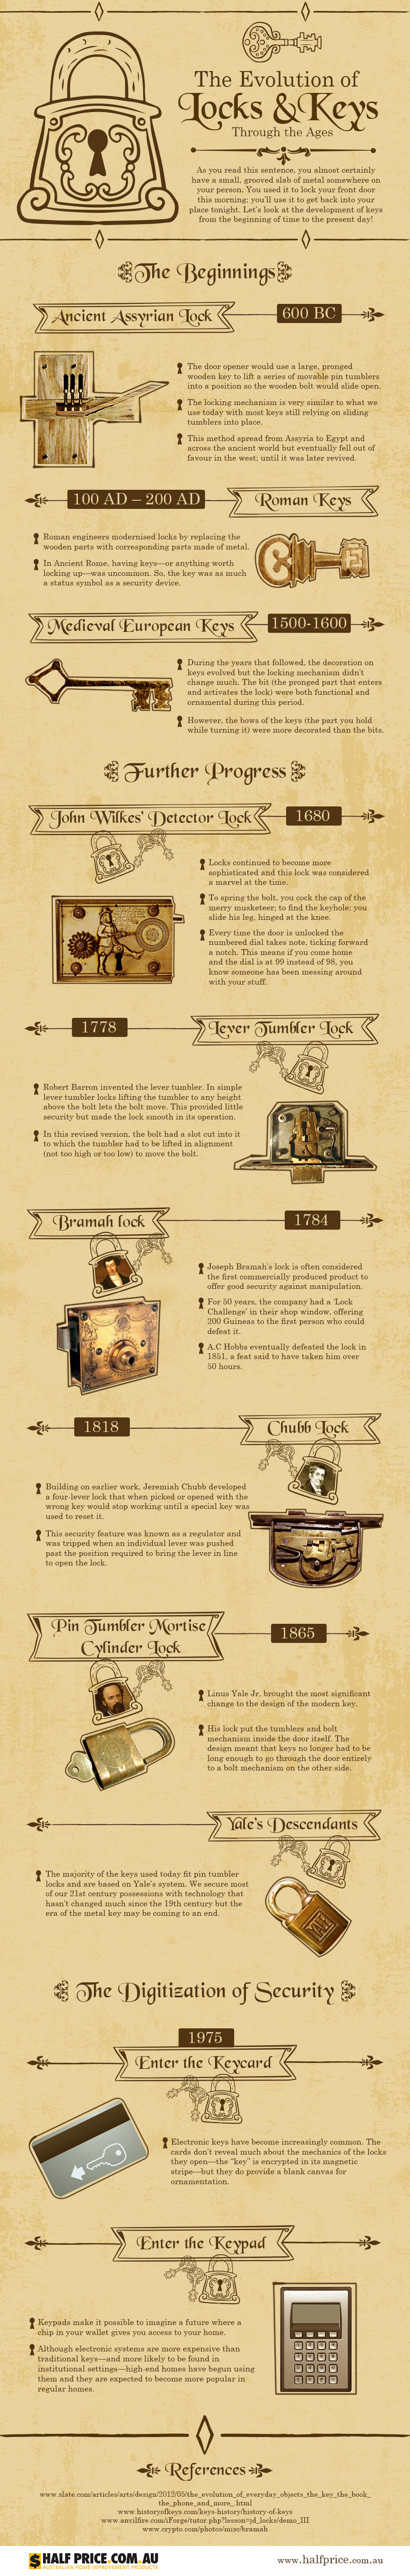 The Evolution of Locks & Keys Through the Ages